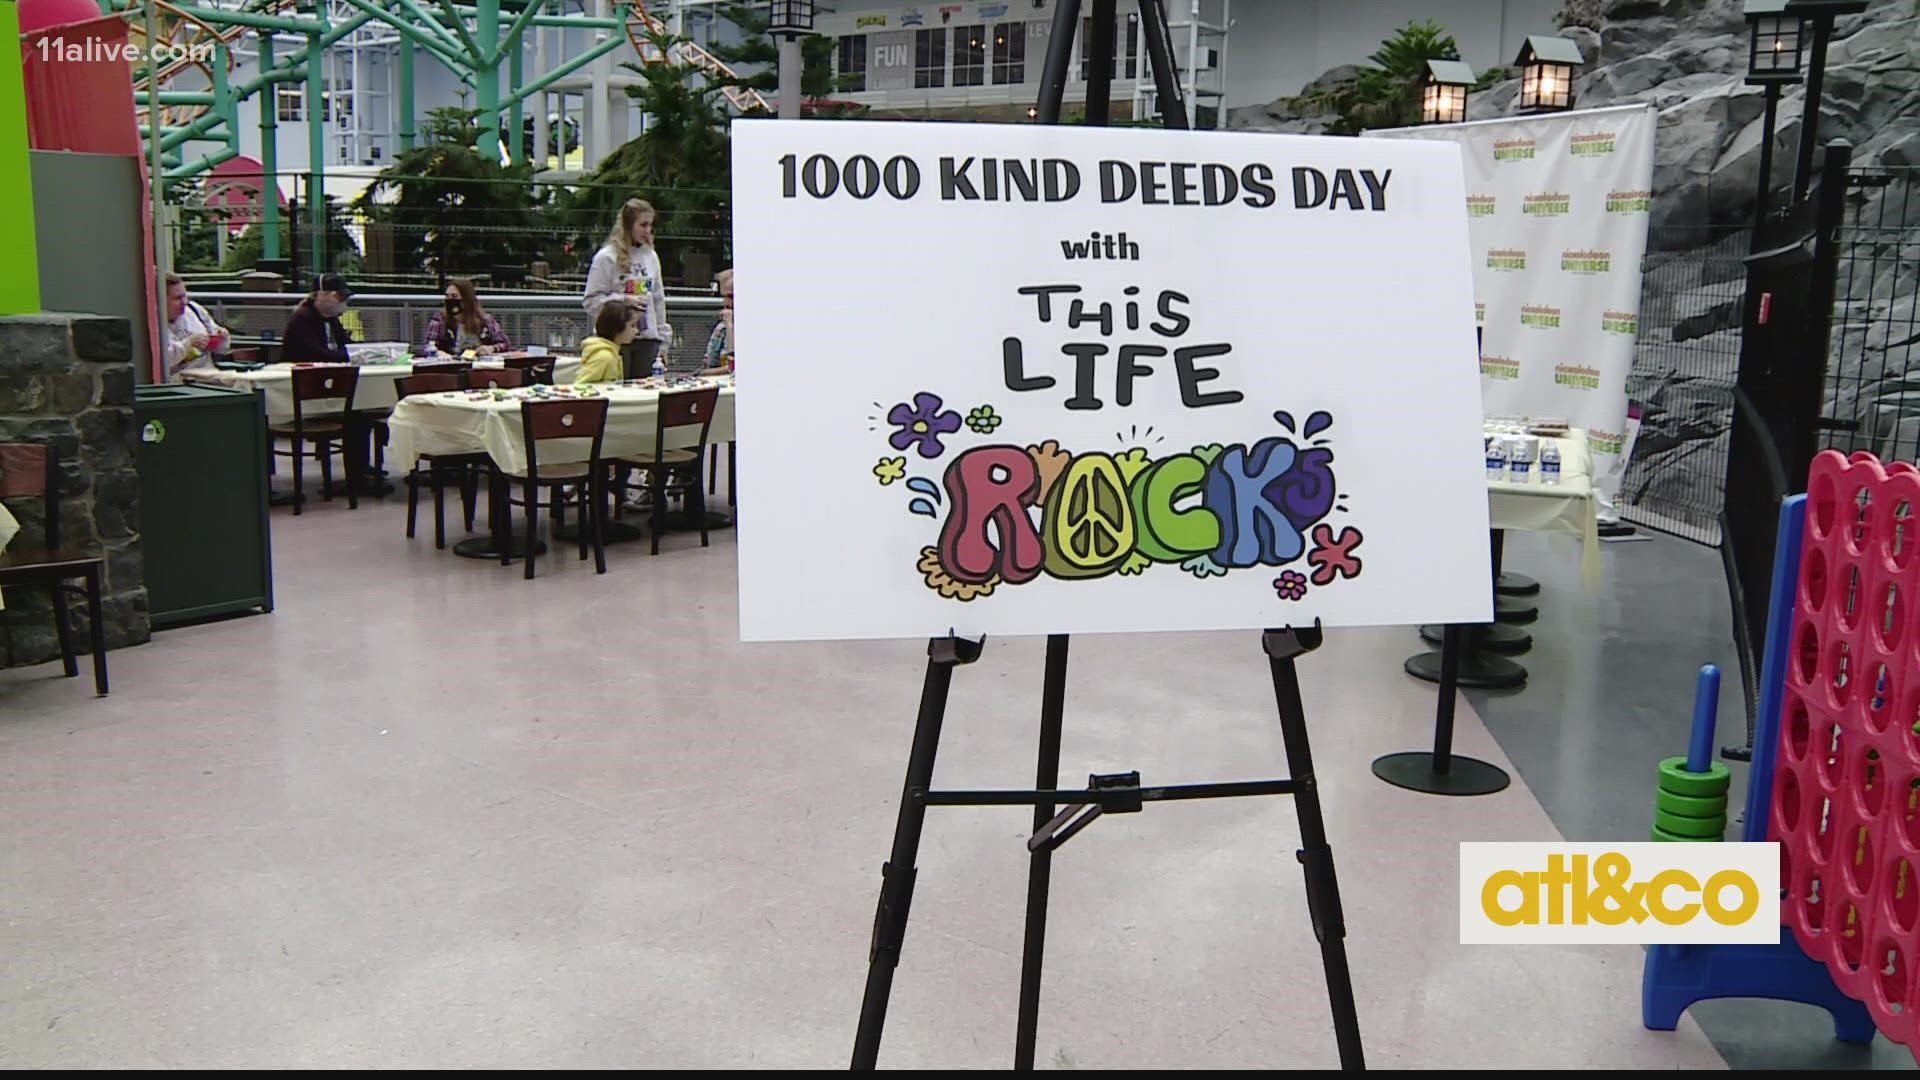 What a sweet mission! An 11-year-old girl set out to complete 1,000 kind deeds on Black Friday.